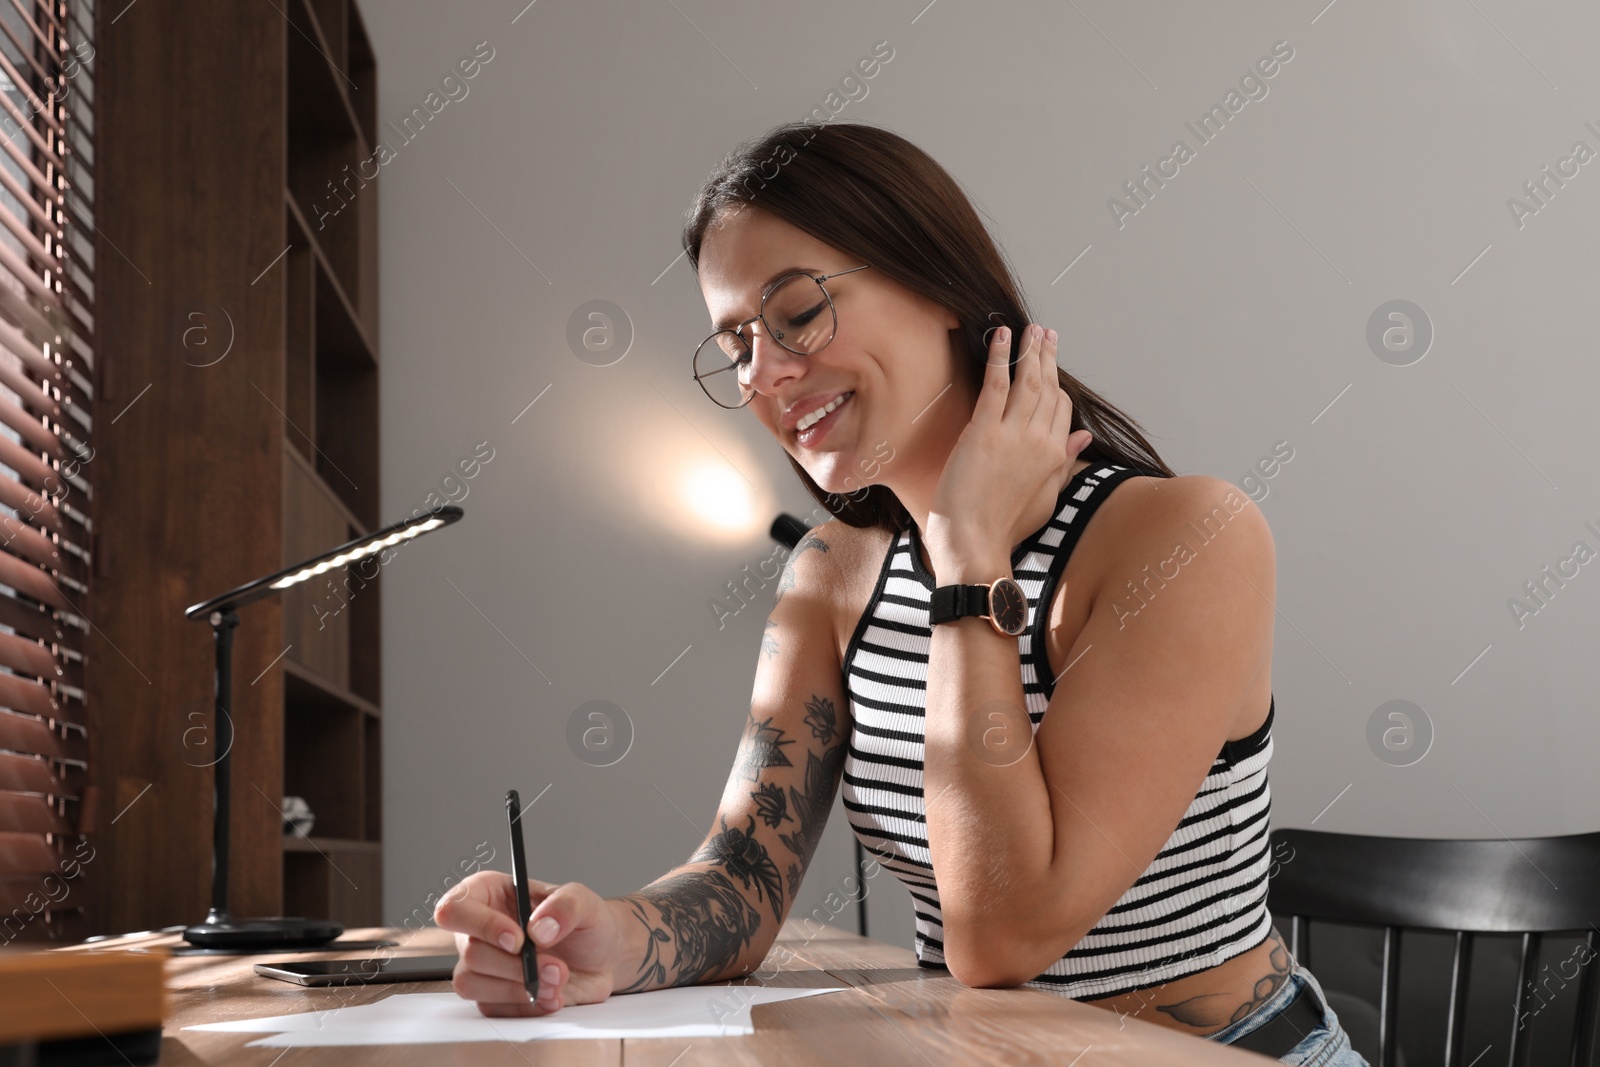 Photo of Beautiful woman with tattoos on body drawing in sketchbook at table indoors